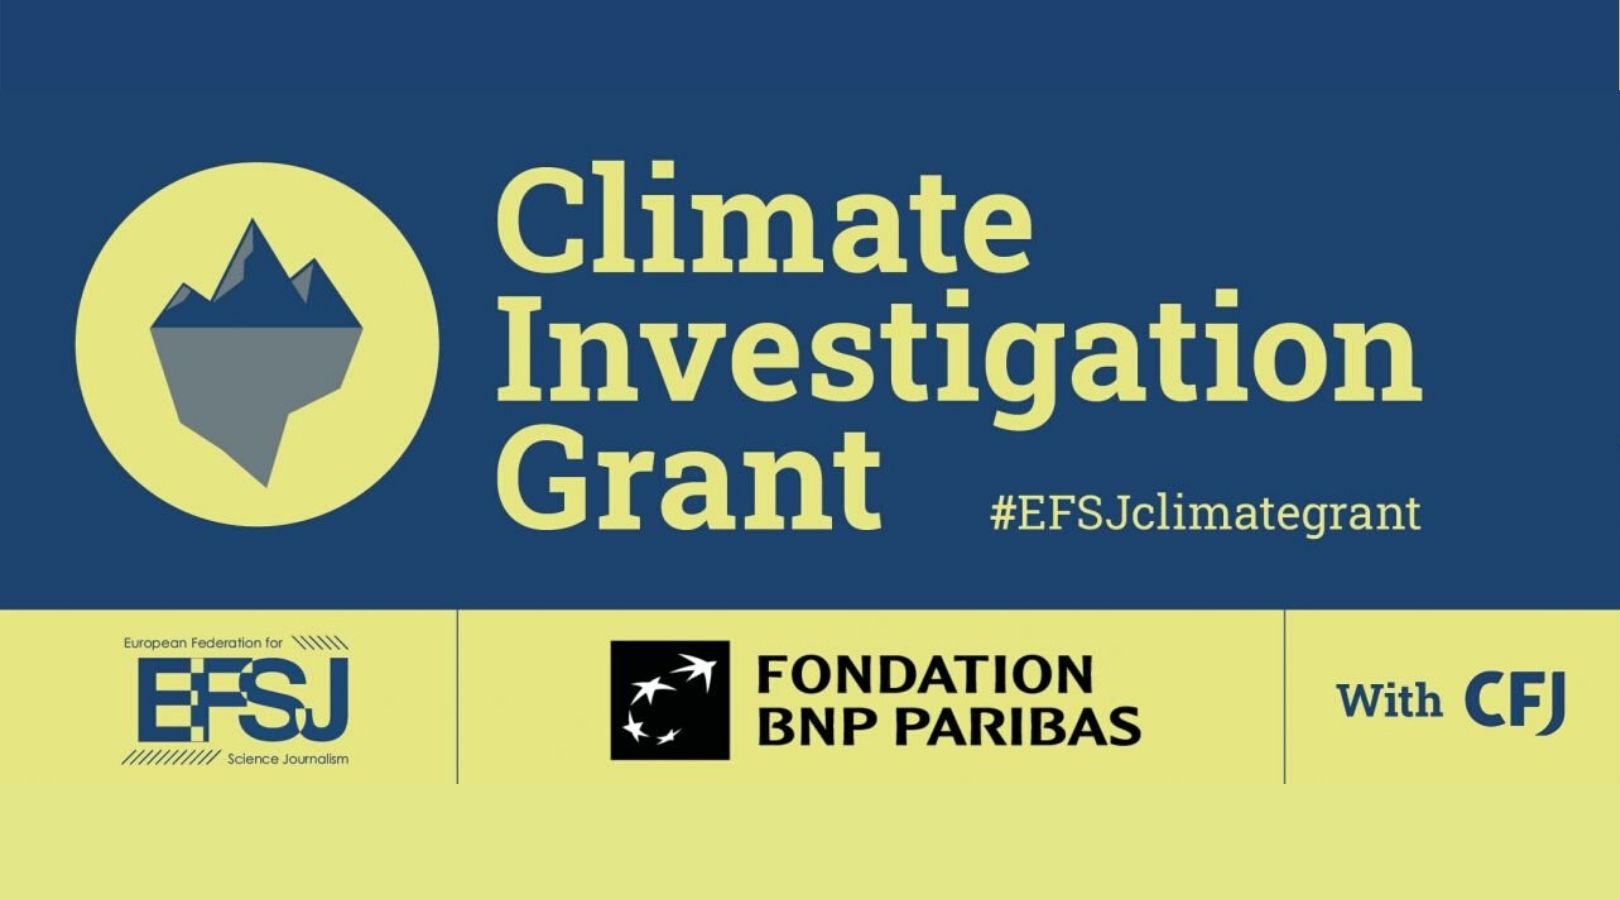 EFSJ Climate Investigation Grant 2020 for Journalists in Europe (Up to 12,000 euros)